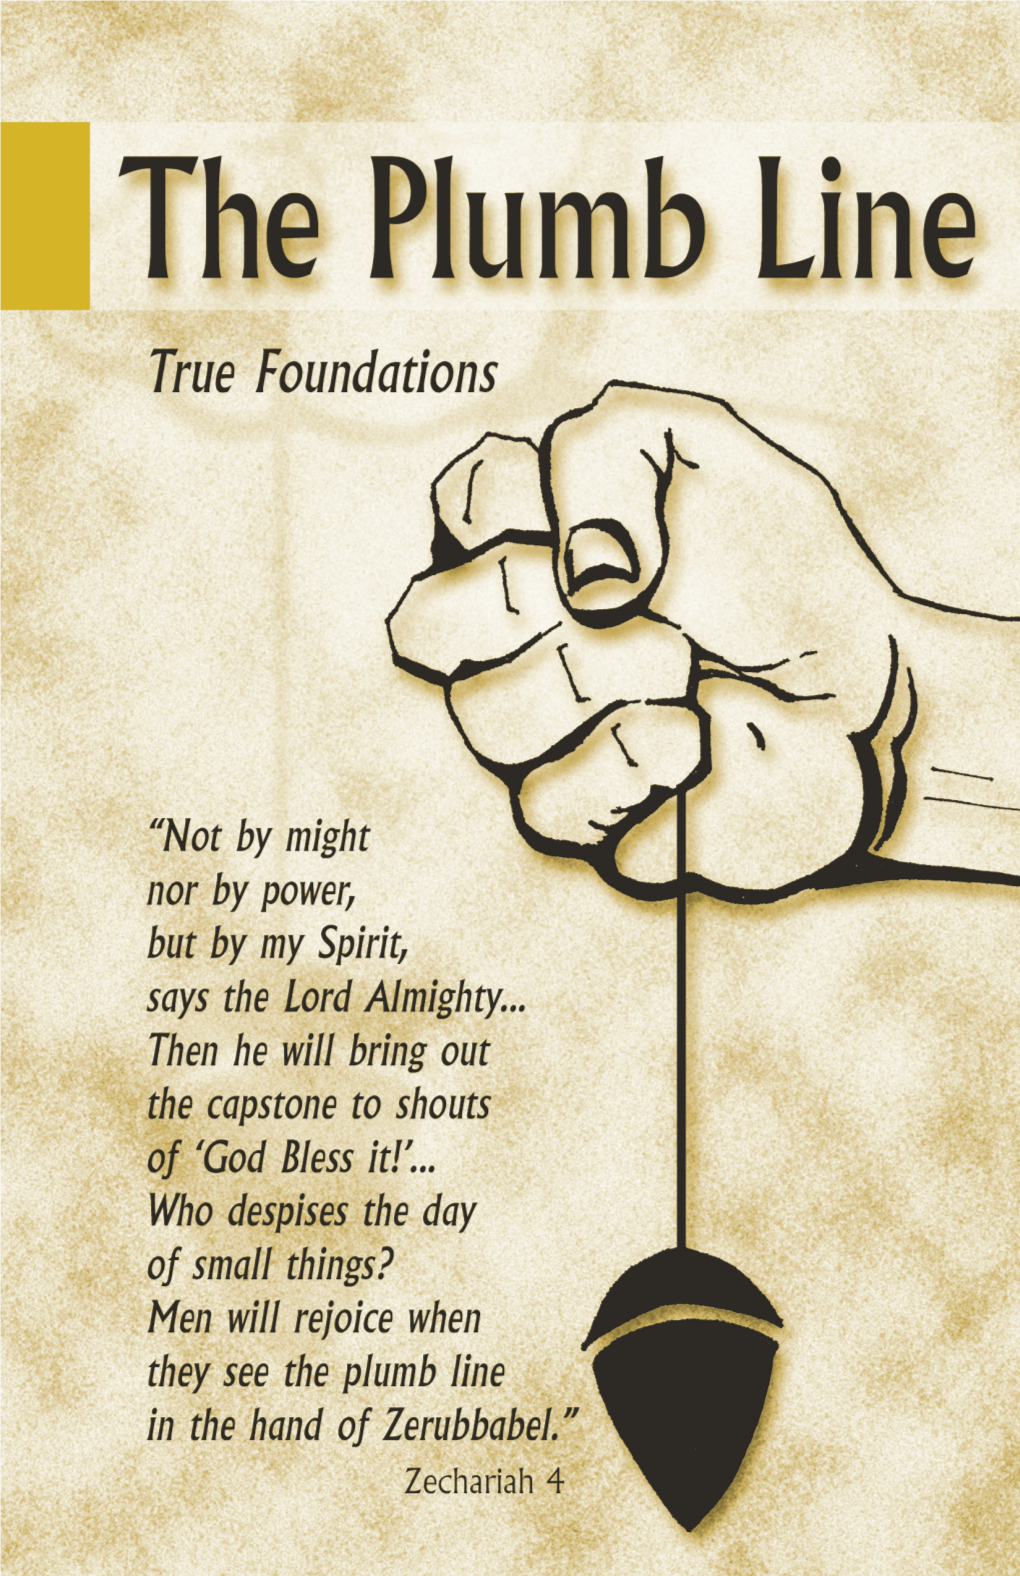 The Plumb Line True Foundations As Always, If We Can Help You in Any Way, Please Contact the Church Here at P.O